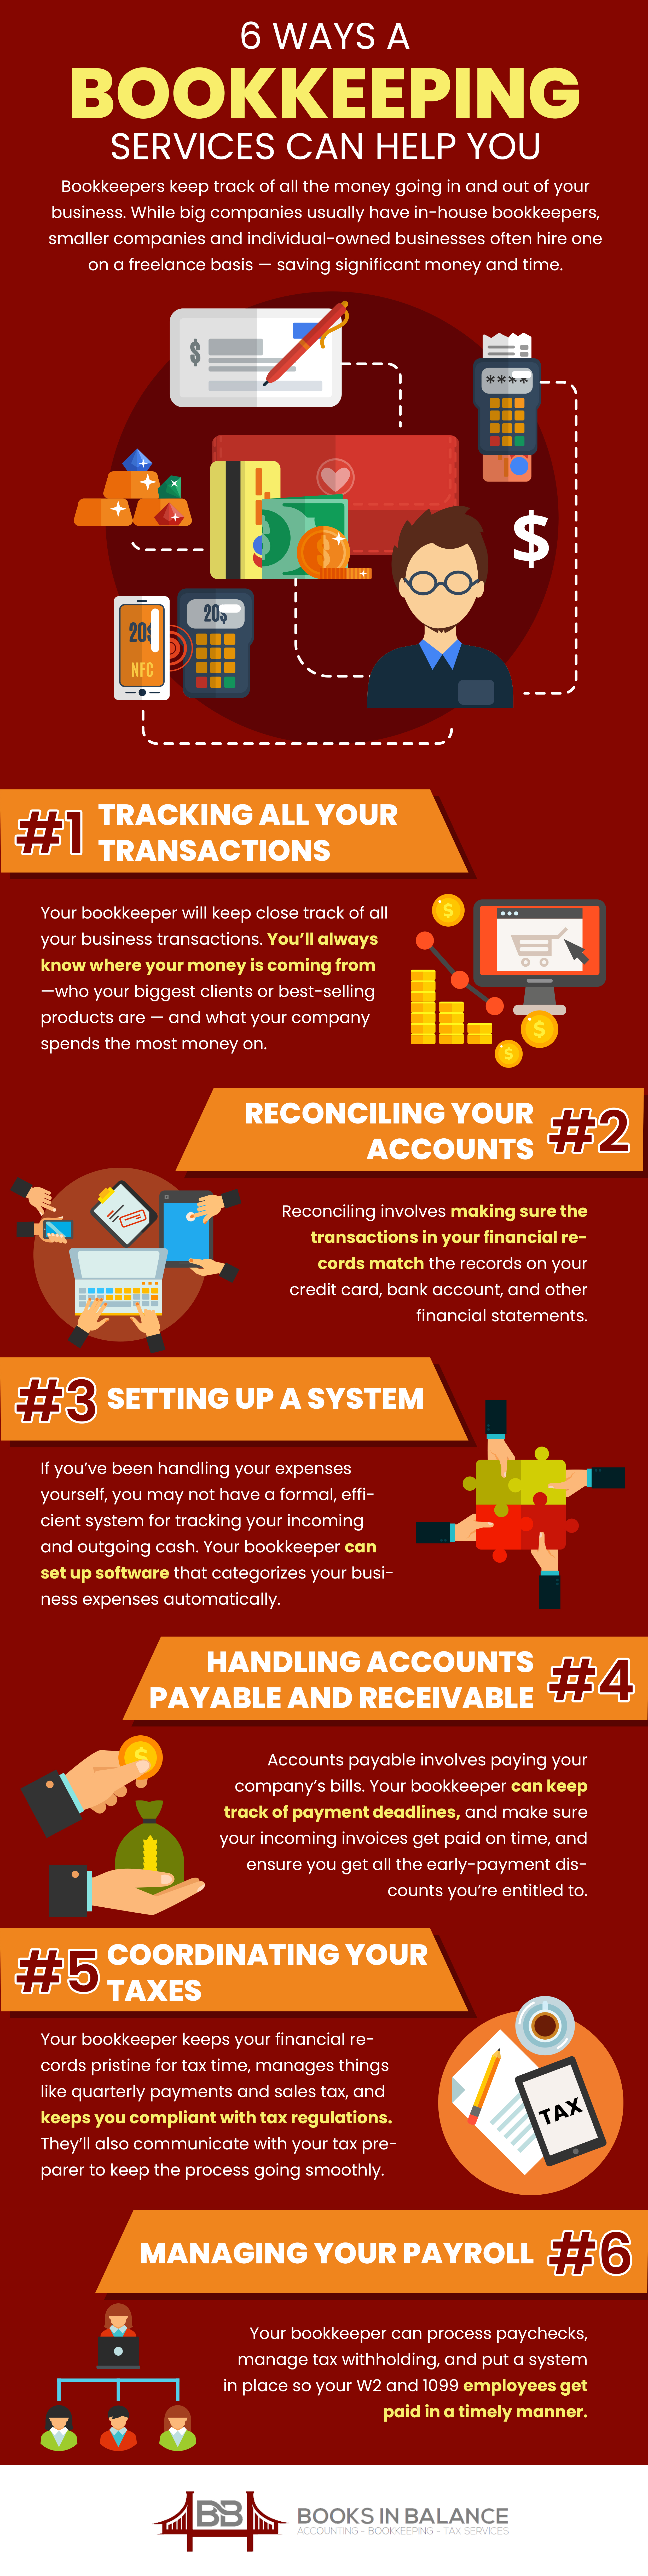 infographic-6-ways-bookkeeping-services-can-help-you-books-in-balance